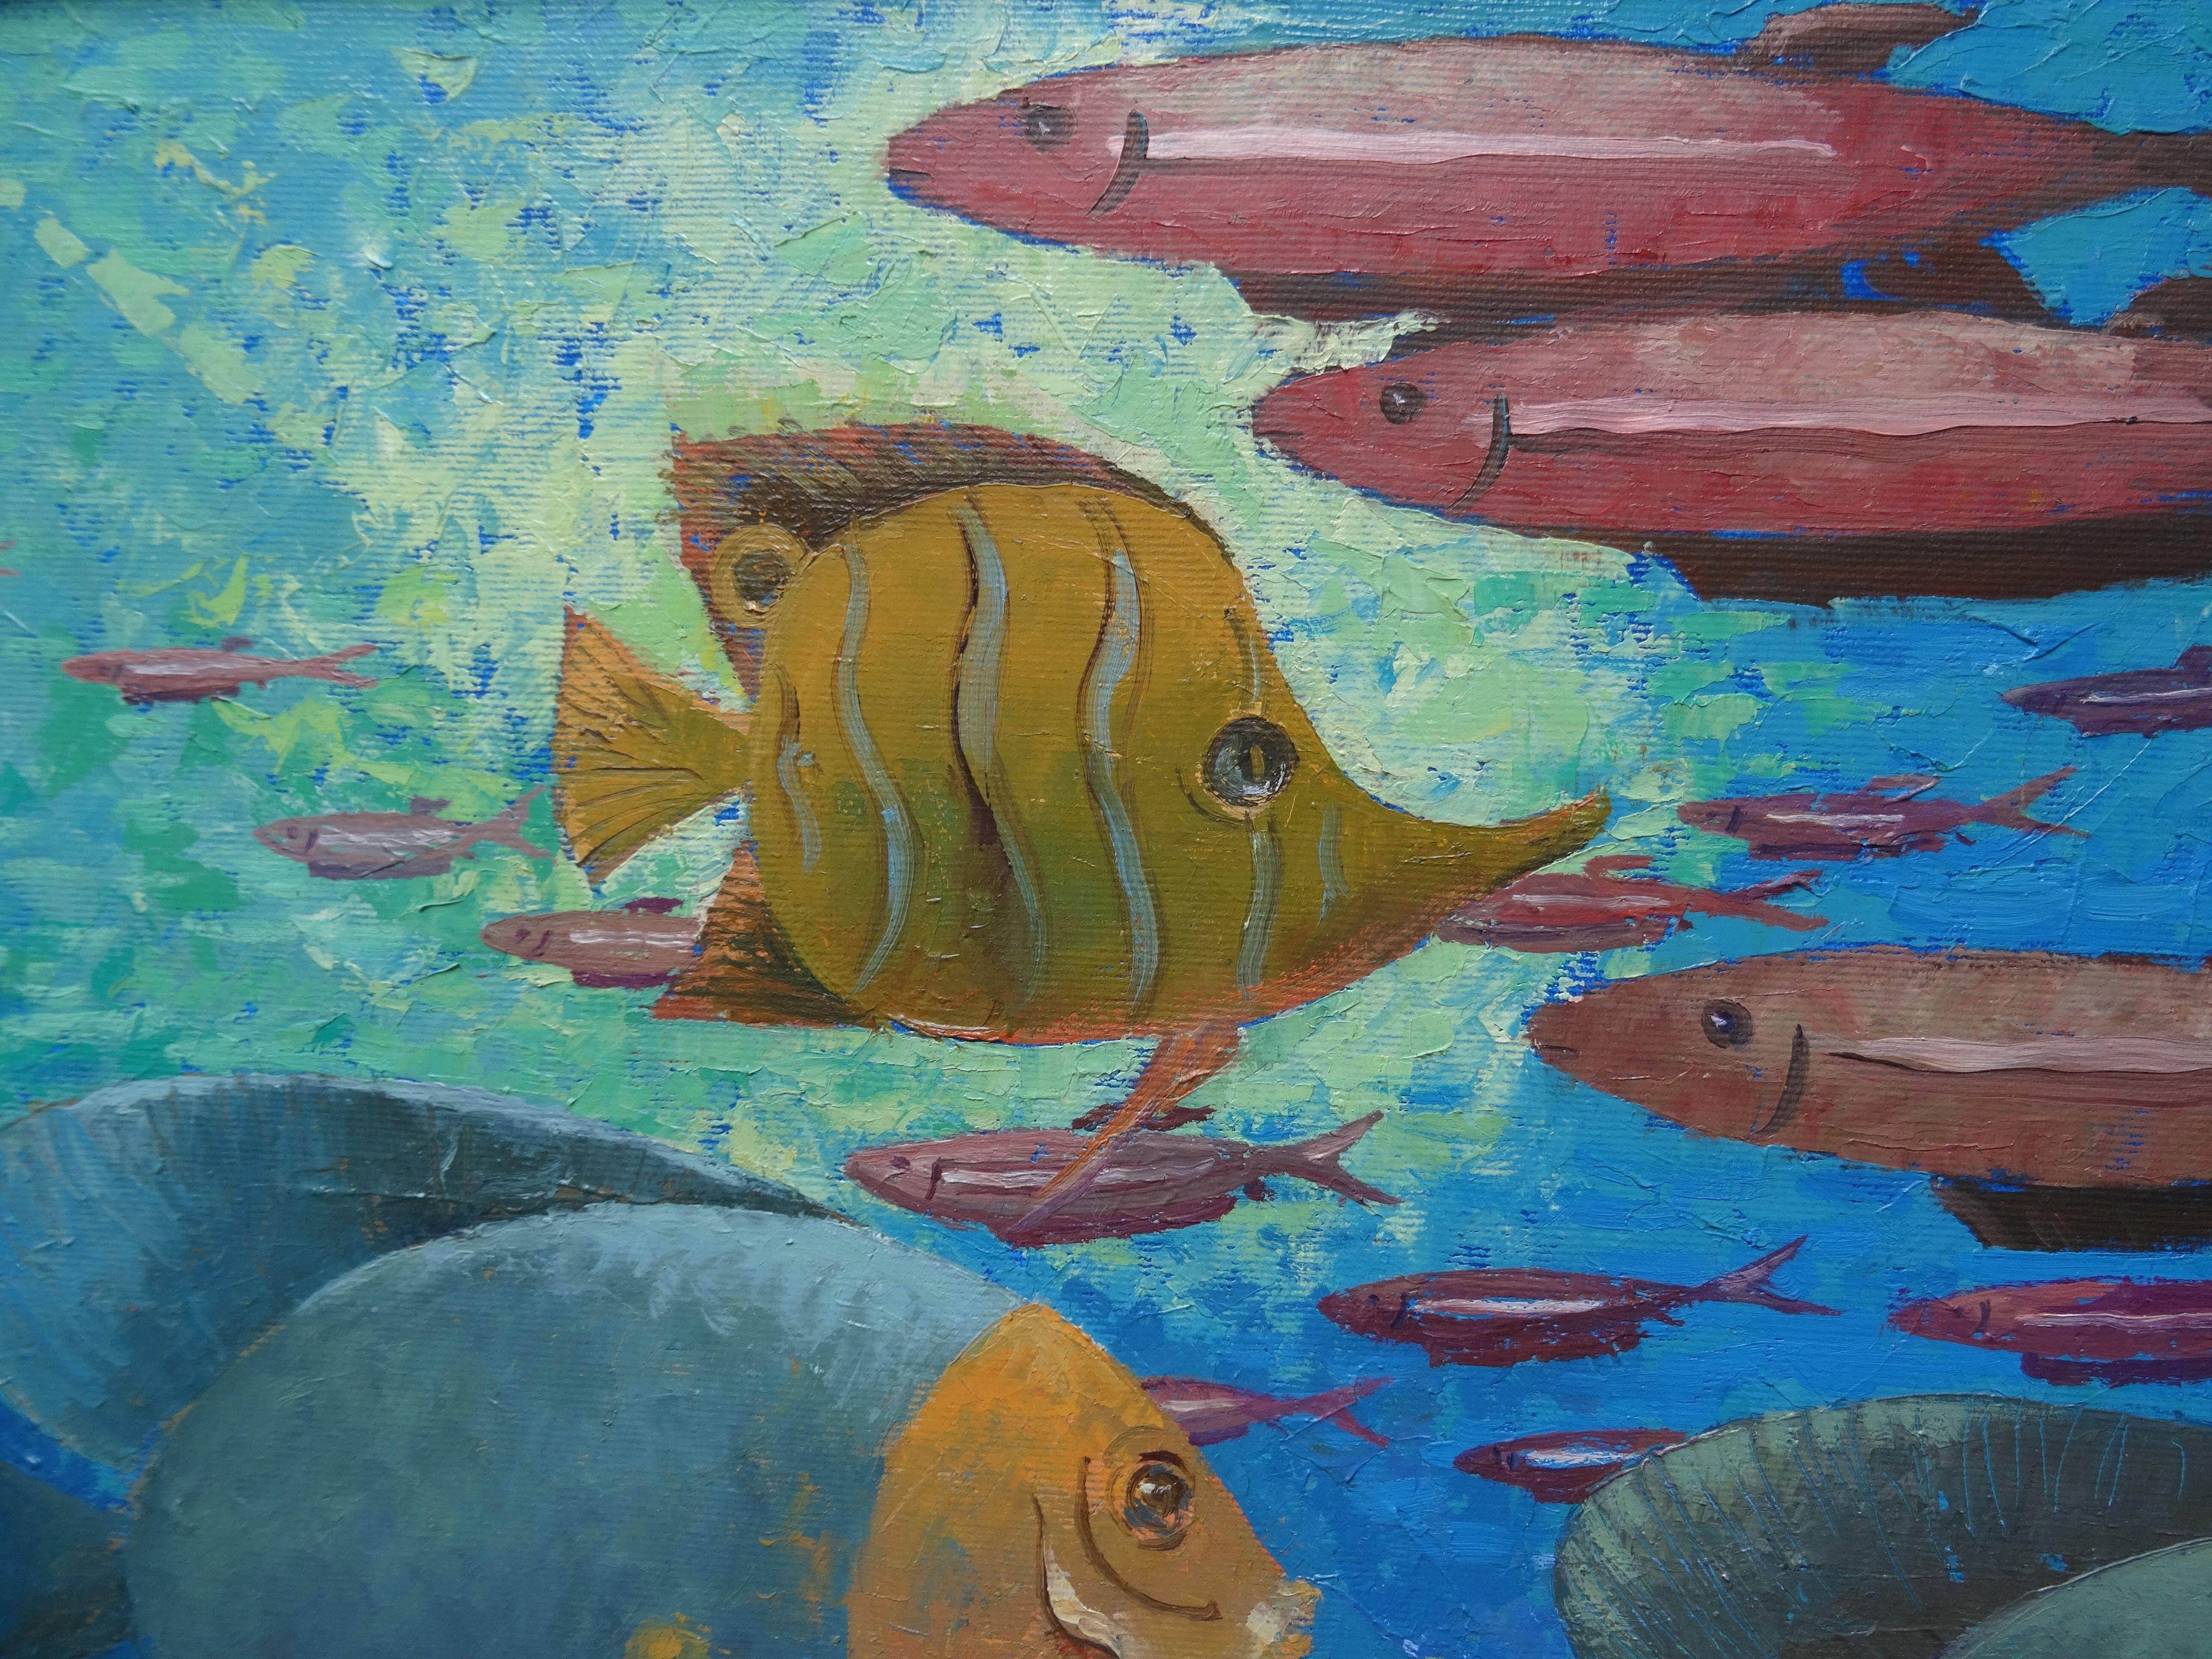 Fishes. Underwater world. Blue, green colors. 2018. Oil on canvas, 80x90 cm - Contemporary Painting by Nugzar Kakhiani (Kahiani)